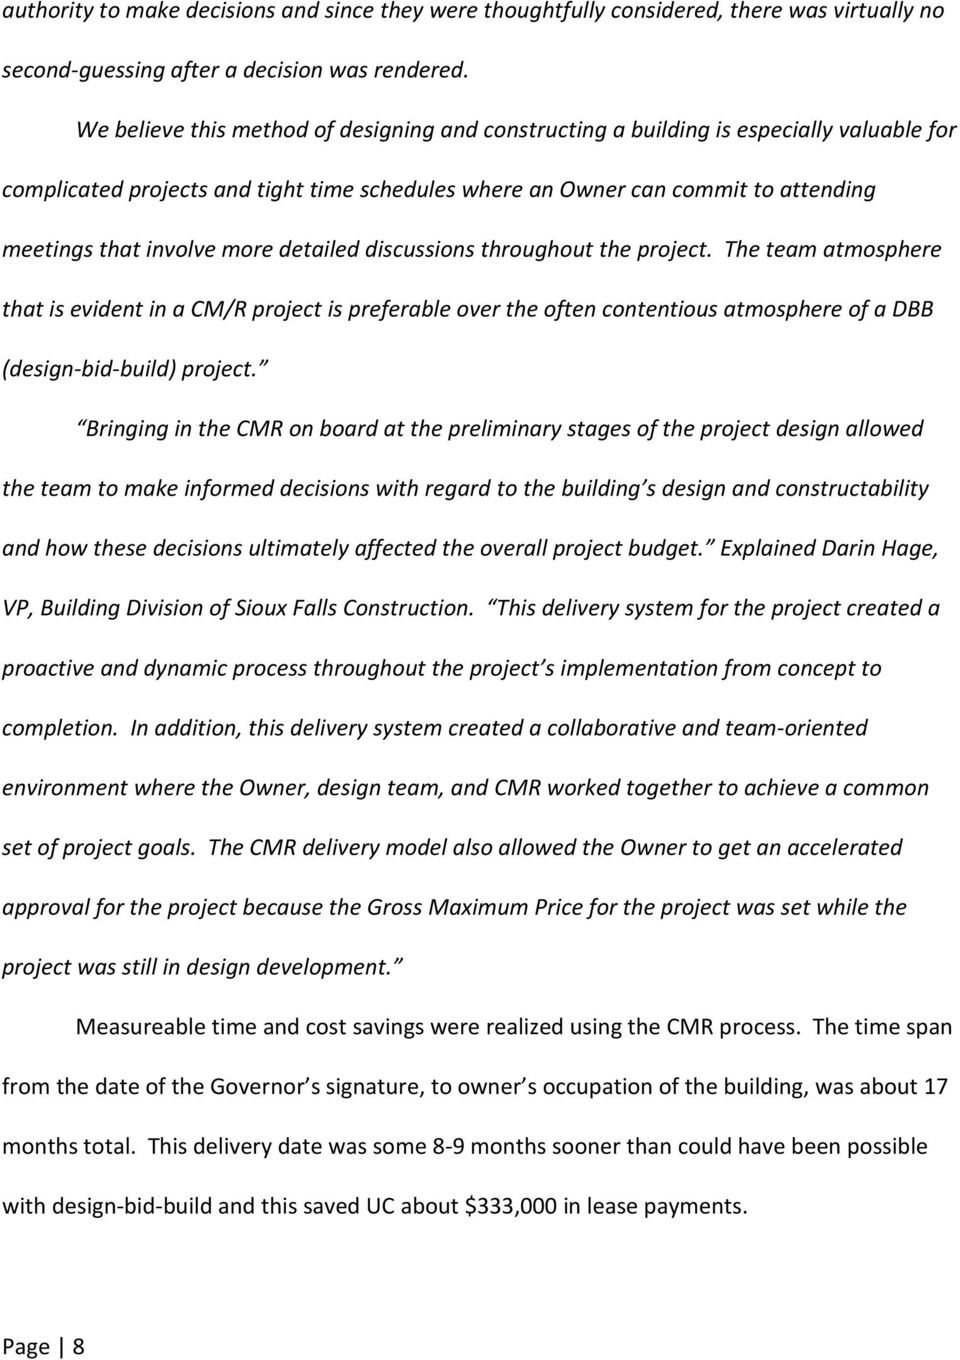 more detailed discussions throughout the project. The team atmosphere that is evident in a CM/R project is preferable over the often contentious atmosphere of a DBB (design-bid-build) project.